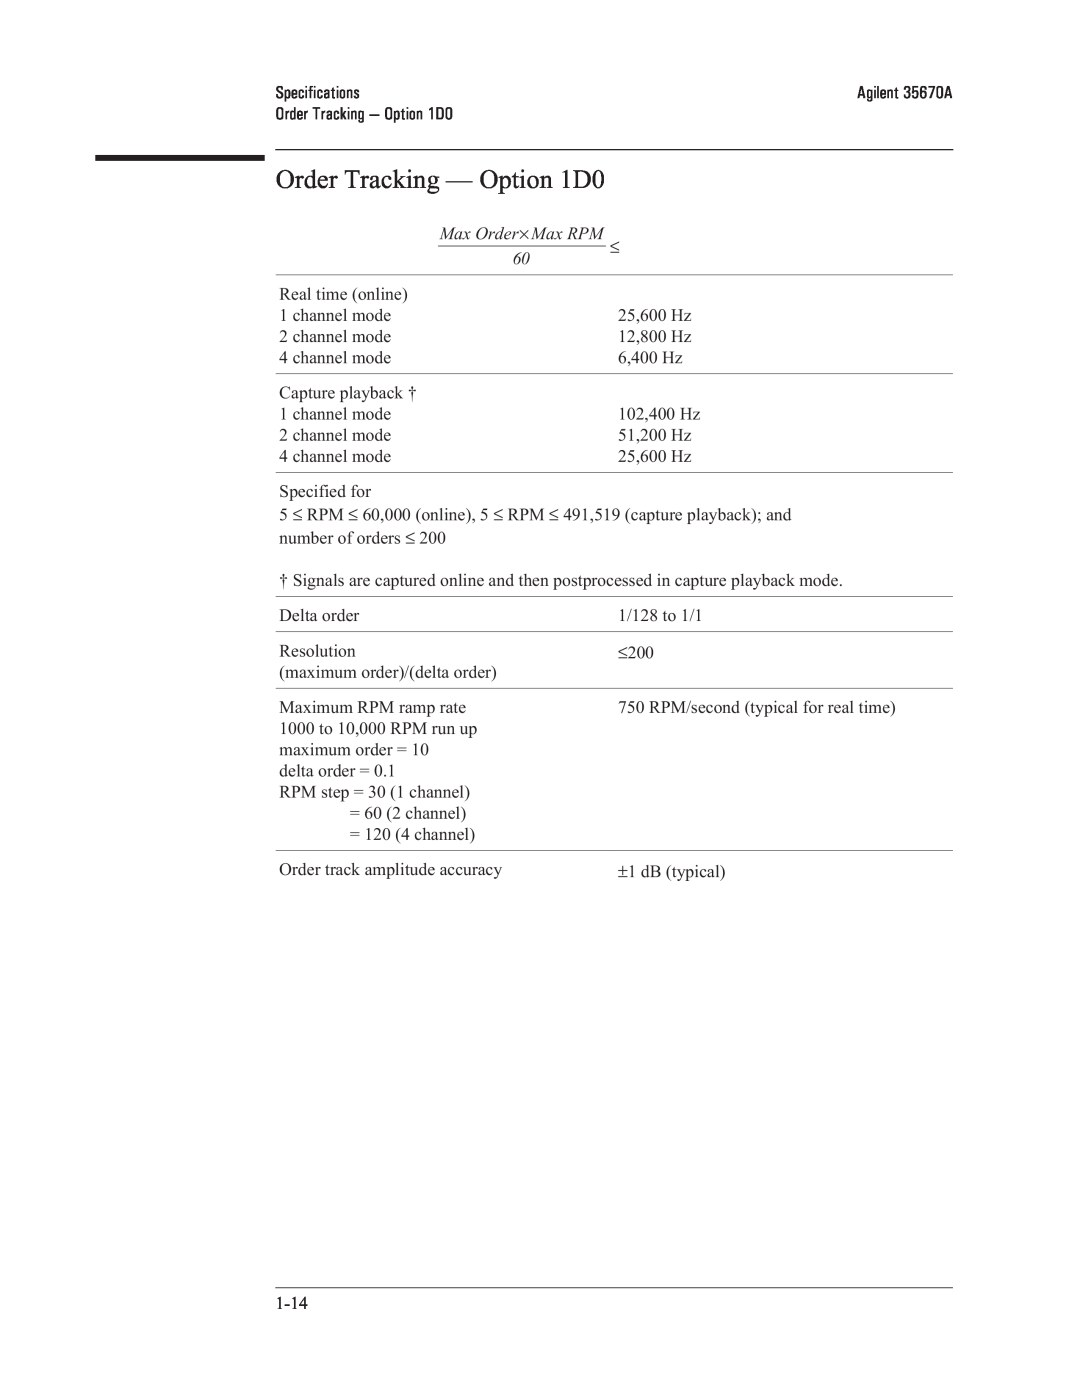 Agilent Technologies 35670-90066 manual Order Tracking — Option 1D0, Max Order⋅ Max RPM 